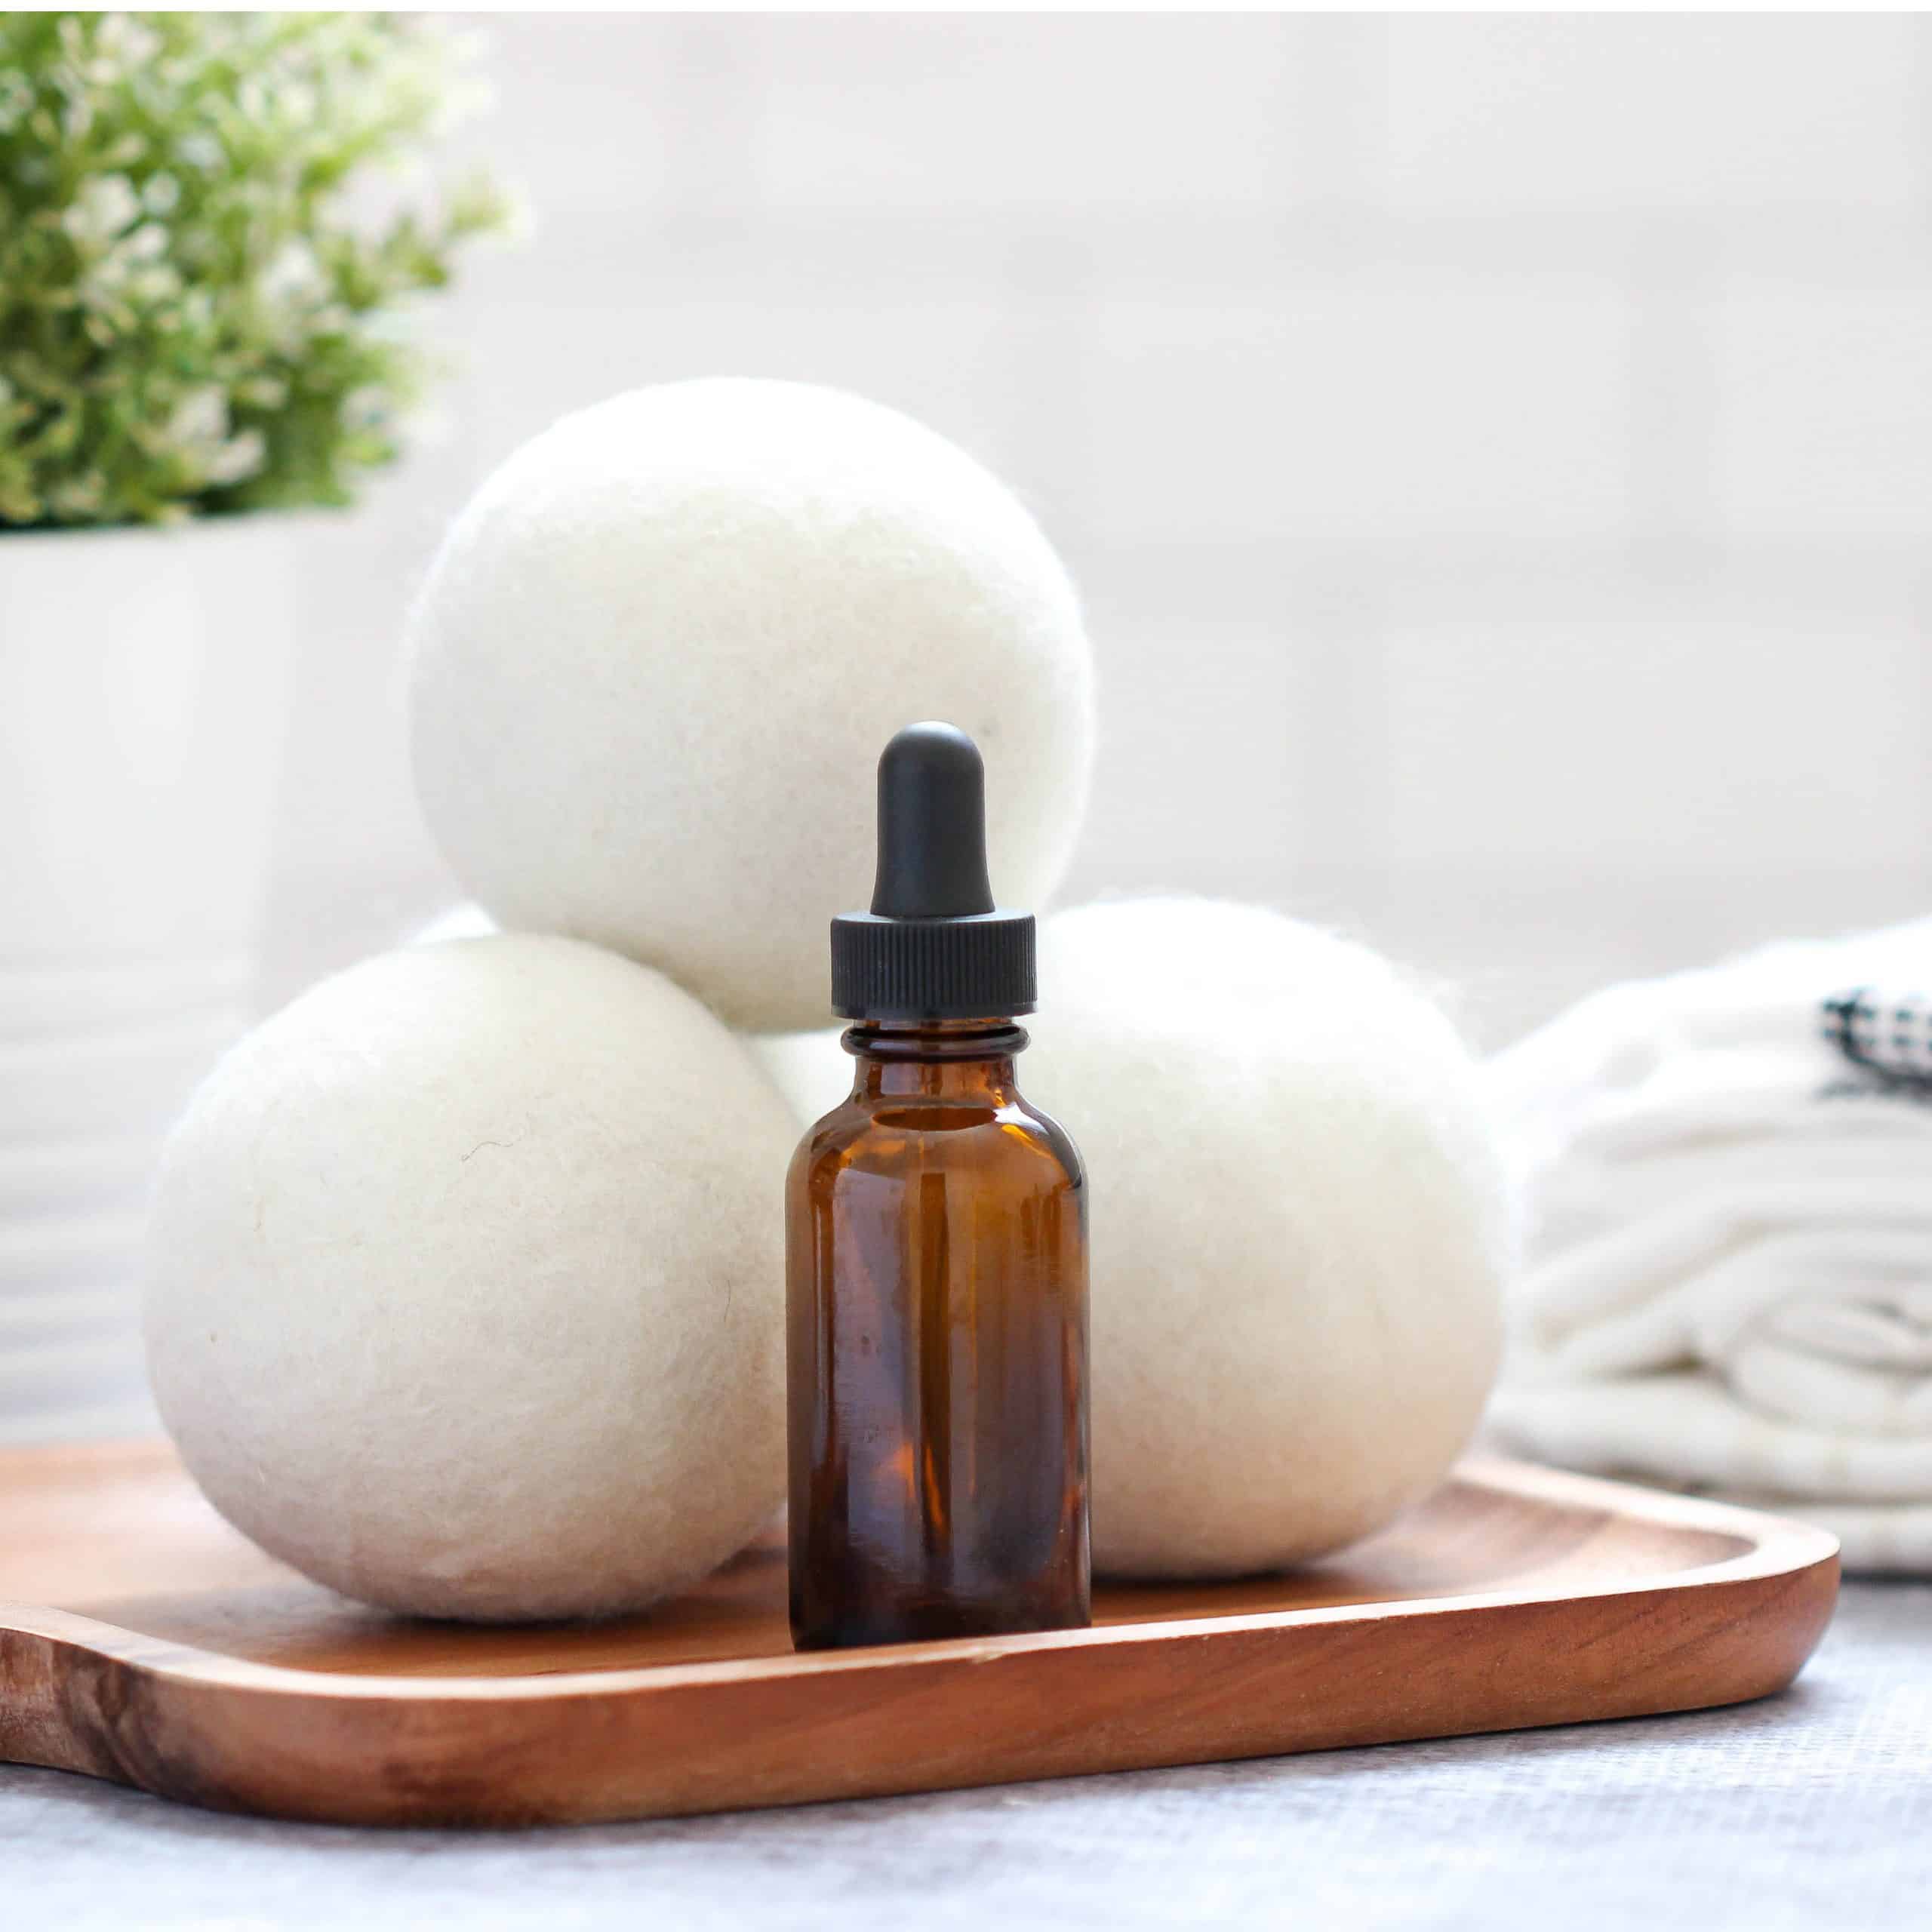 How to Scent Wool Dryer Balls with Essential Oils - Making it in